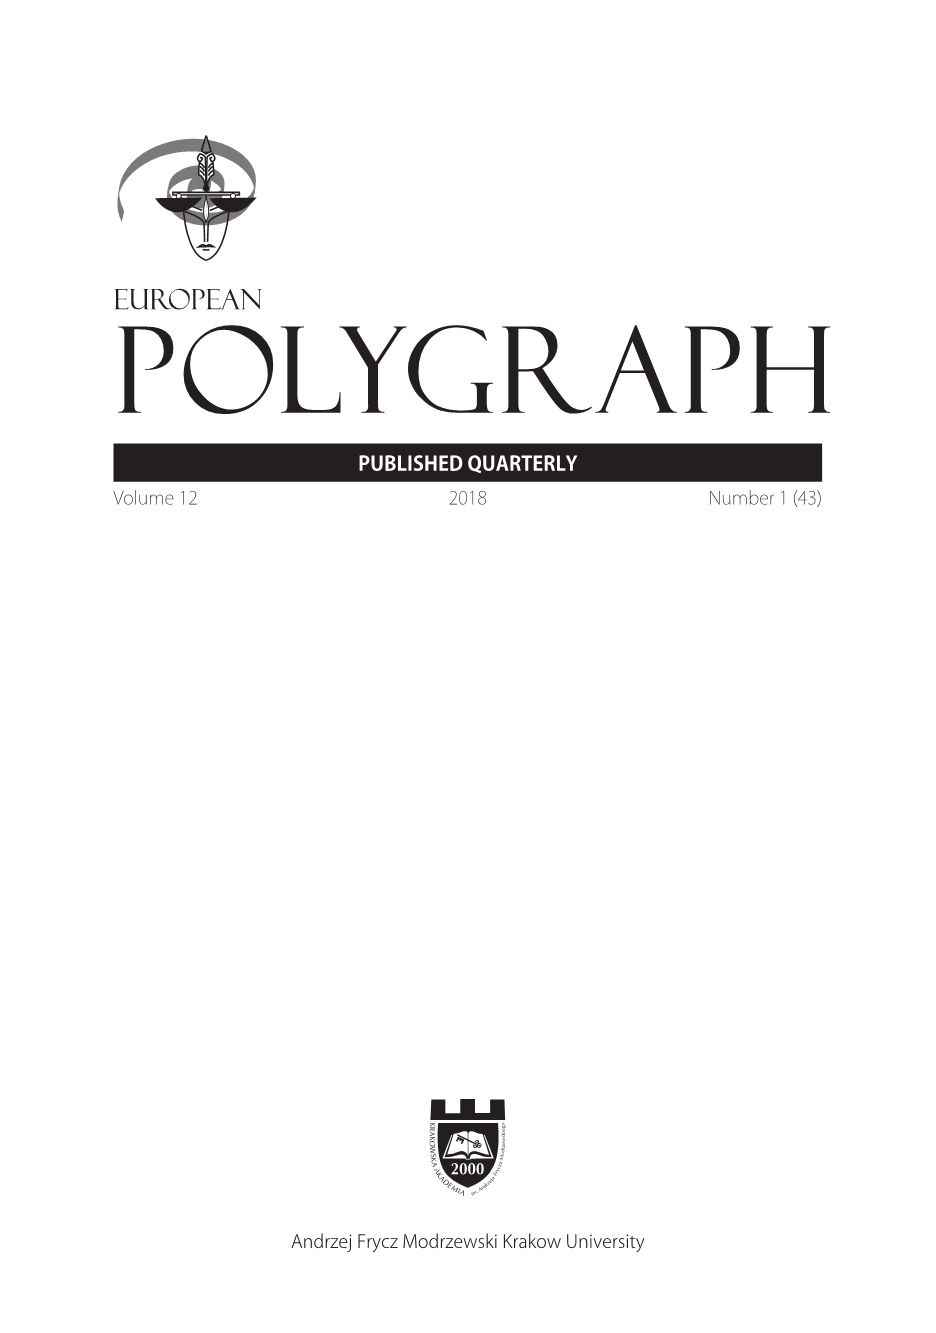 Tuvia Shurany, Nathan J. Gordon: The Foundation of Polygraph. The Pre-Test Interview, Columbia SC 2018, 78 pp.